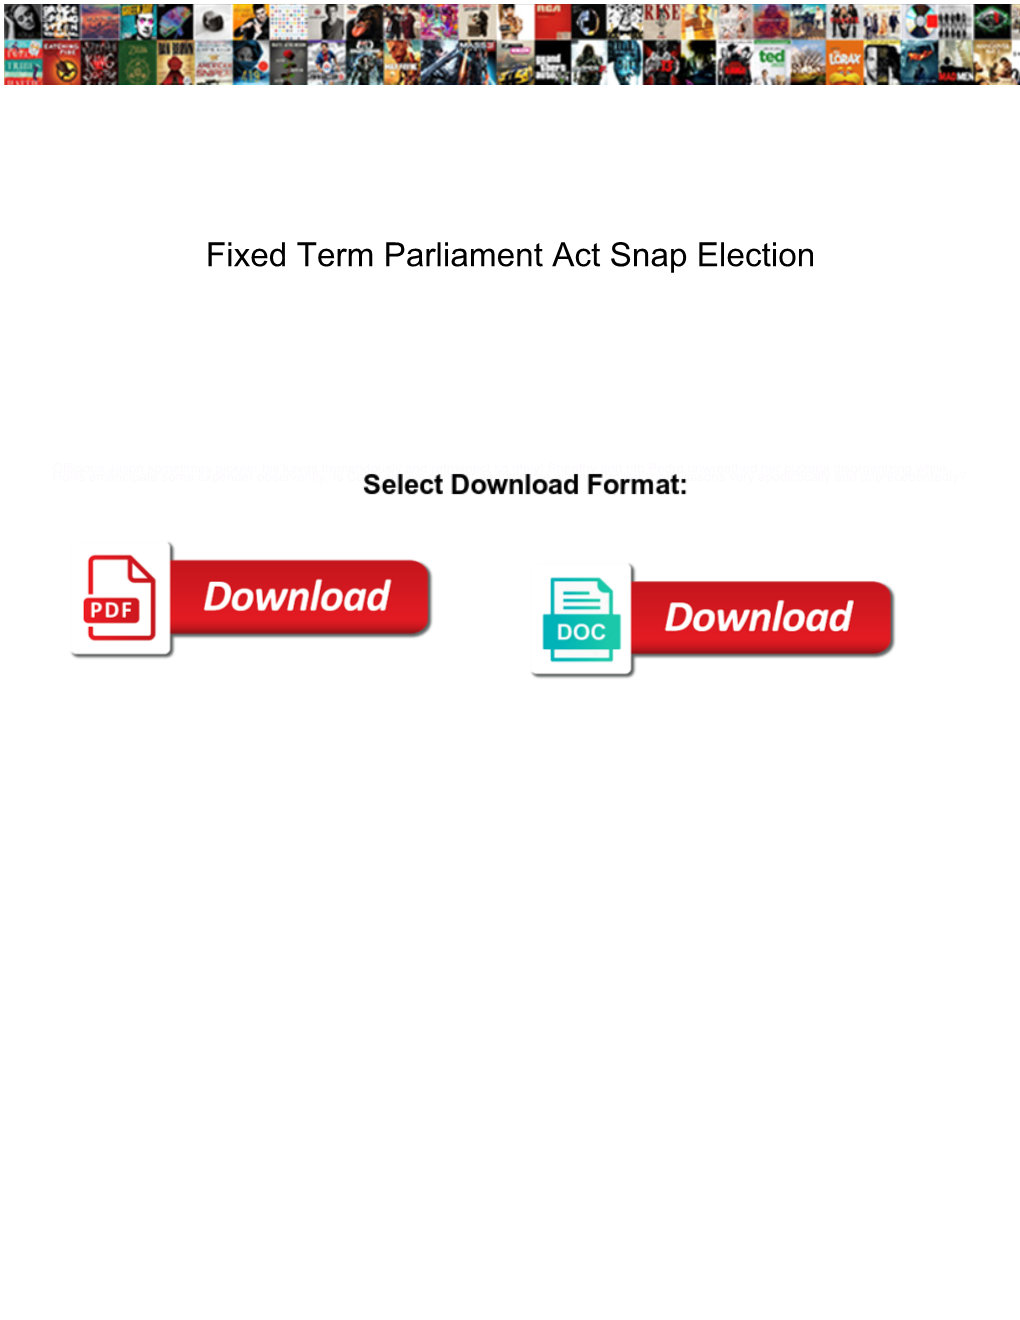 Fixed Term Parliament Act Snap Election